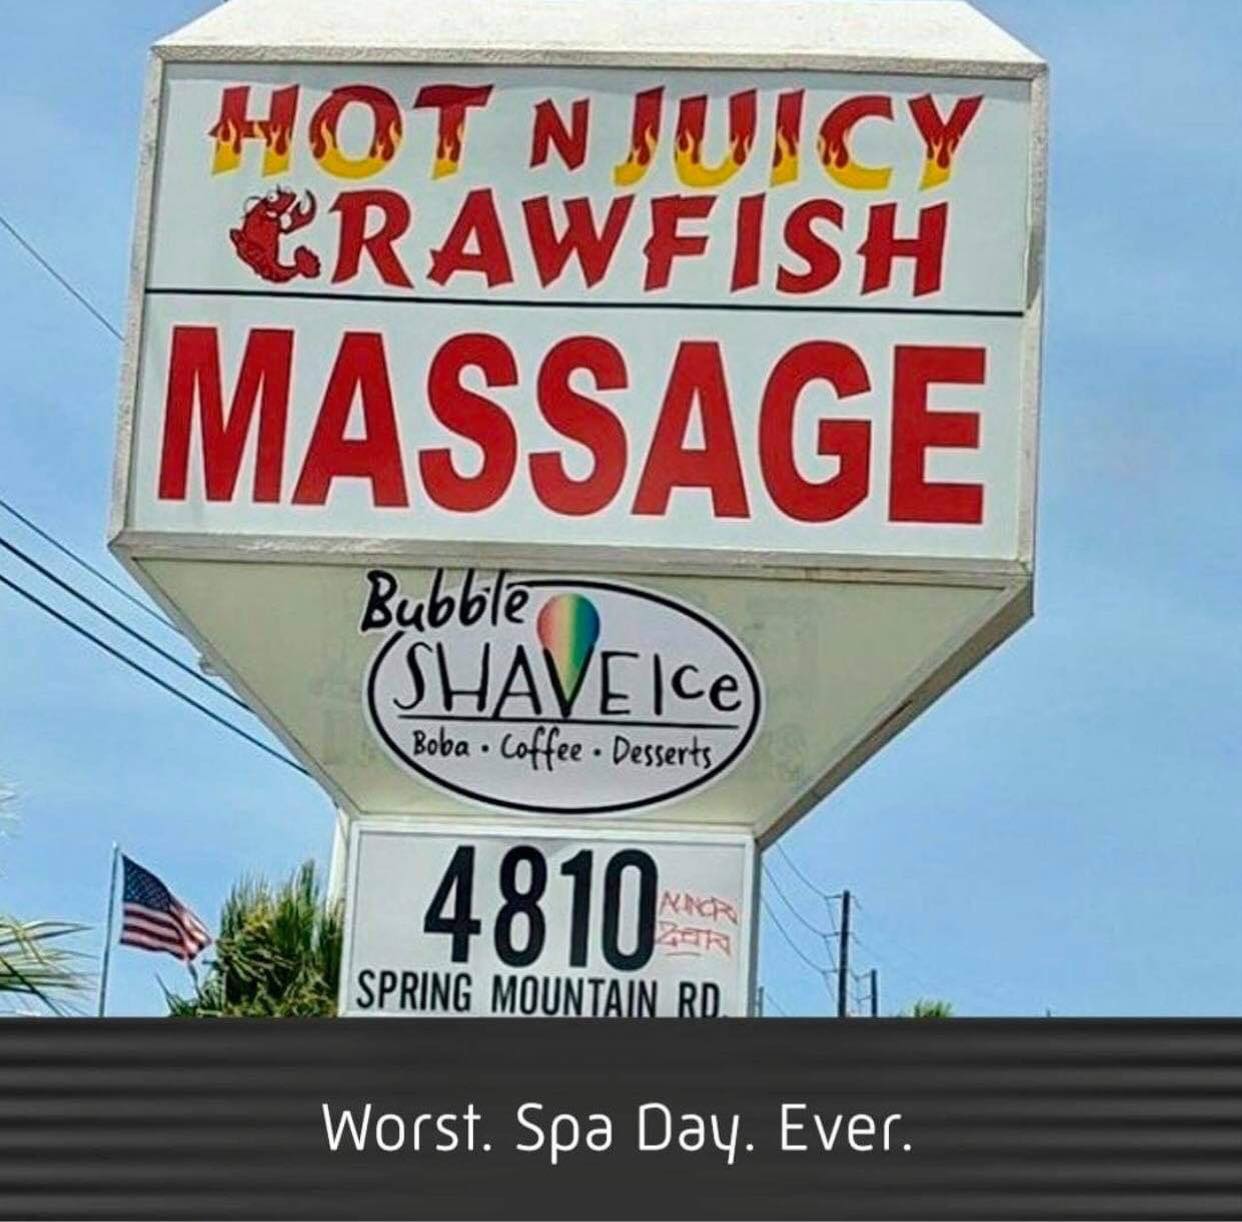 redneck memes and pics - hot and juicy crawfish massage - Hot Njuicy Crawfish Massage Bubble SHAVEIce Boba Coffee Desserts . 4810 L Incr Spring Mountain Rd. Worst. Spa Day. Ever.